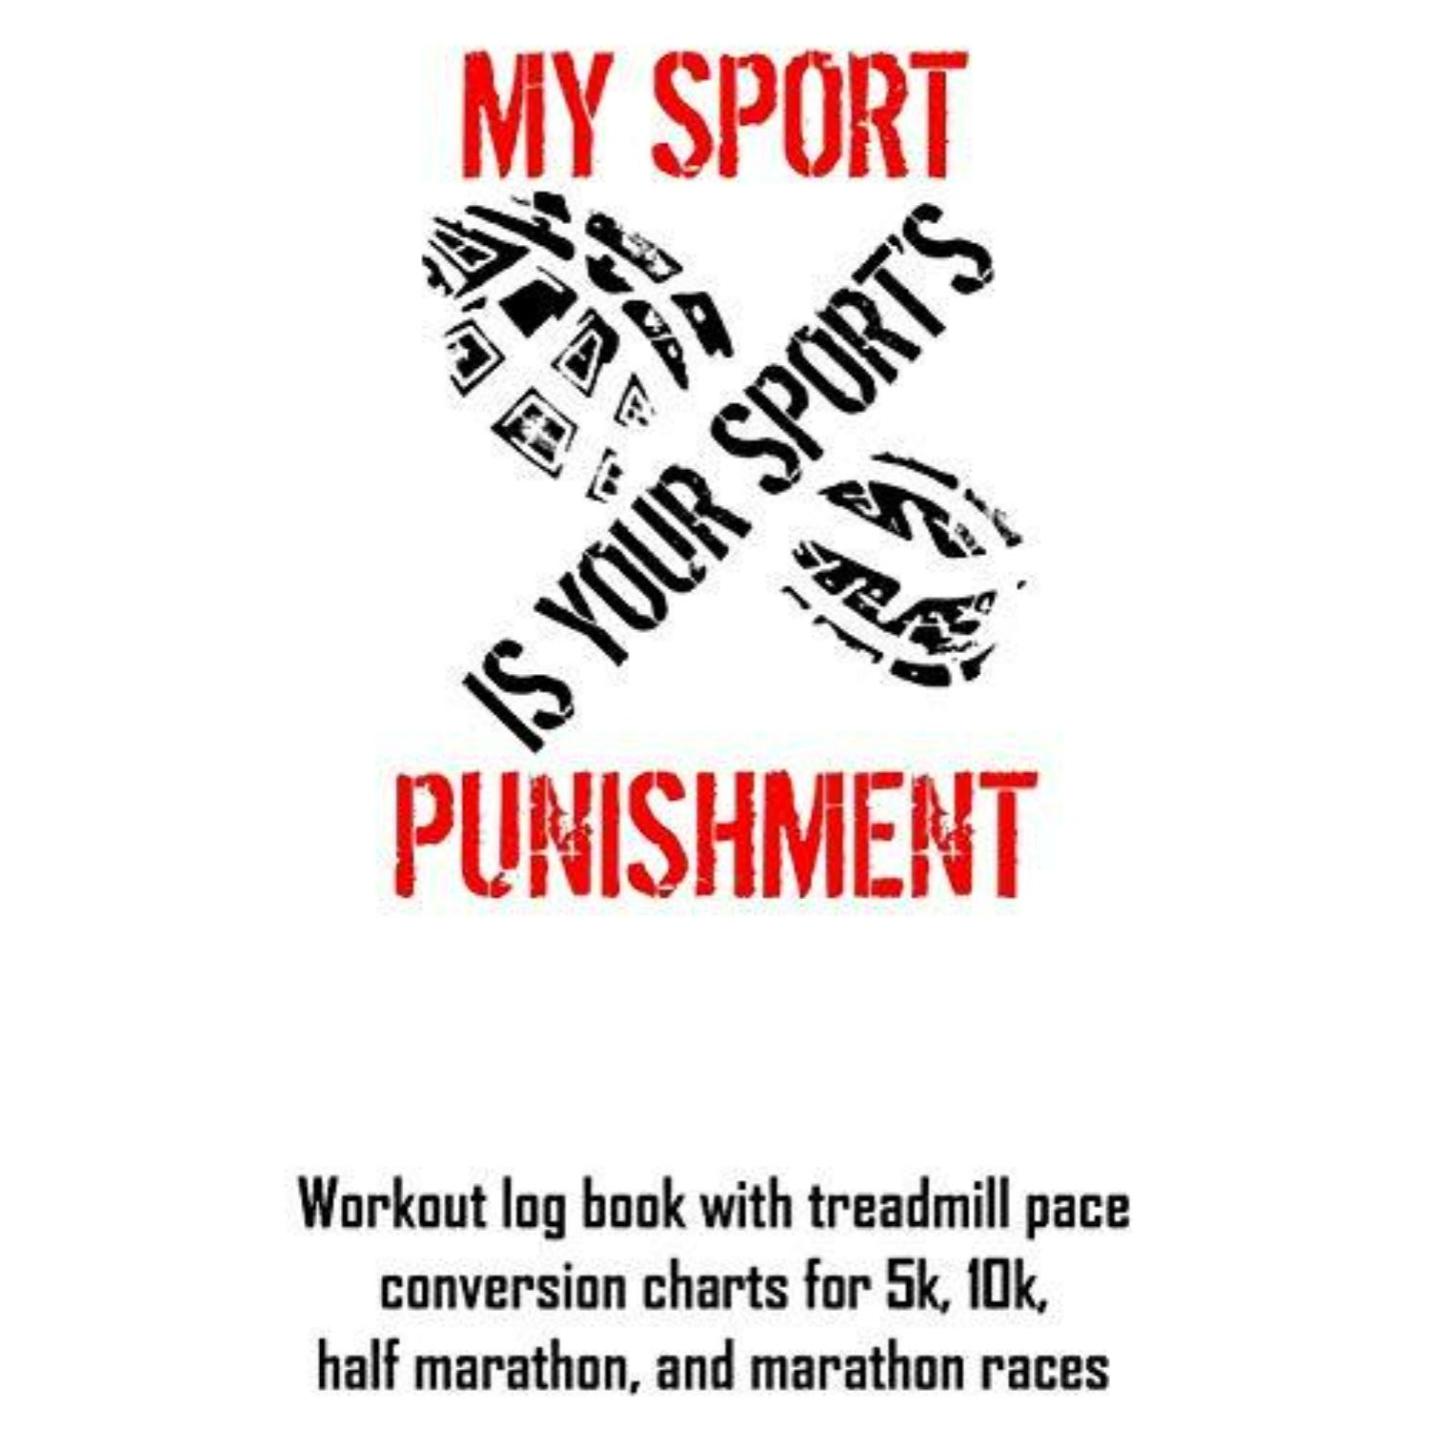 My Sport Is Your Sport's Punishment: Workout Log Book with Treadmill Pace Conversion Charts - happygetfit.com